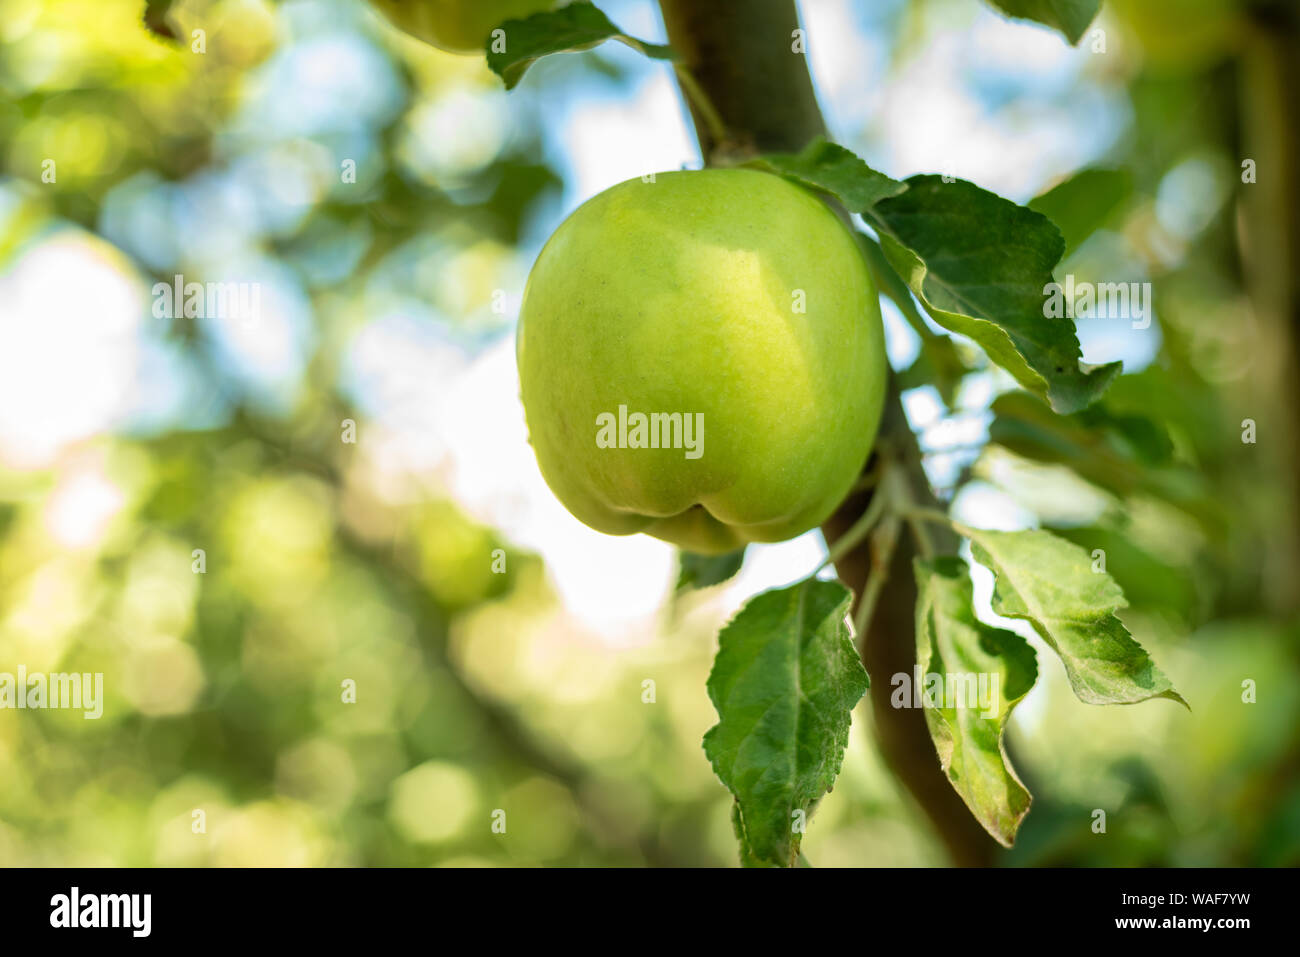 Close Up Of Green Apples Hanging Off A Branch Photo Taken In My Backyard Stock Photo Alamy